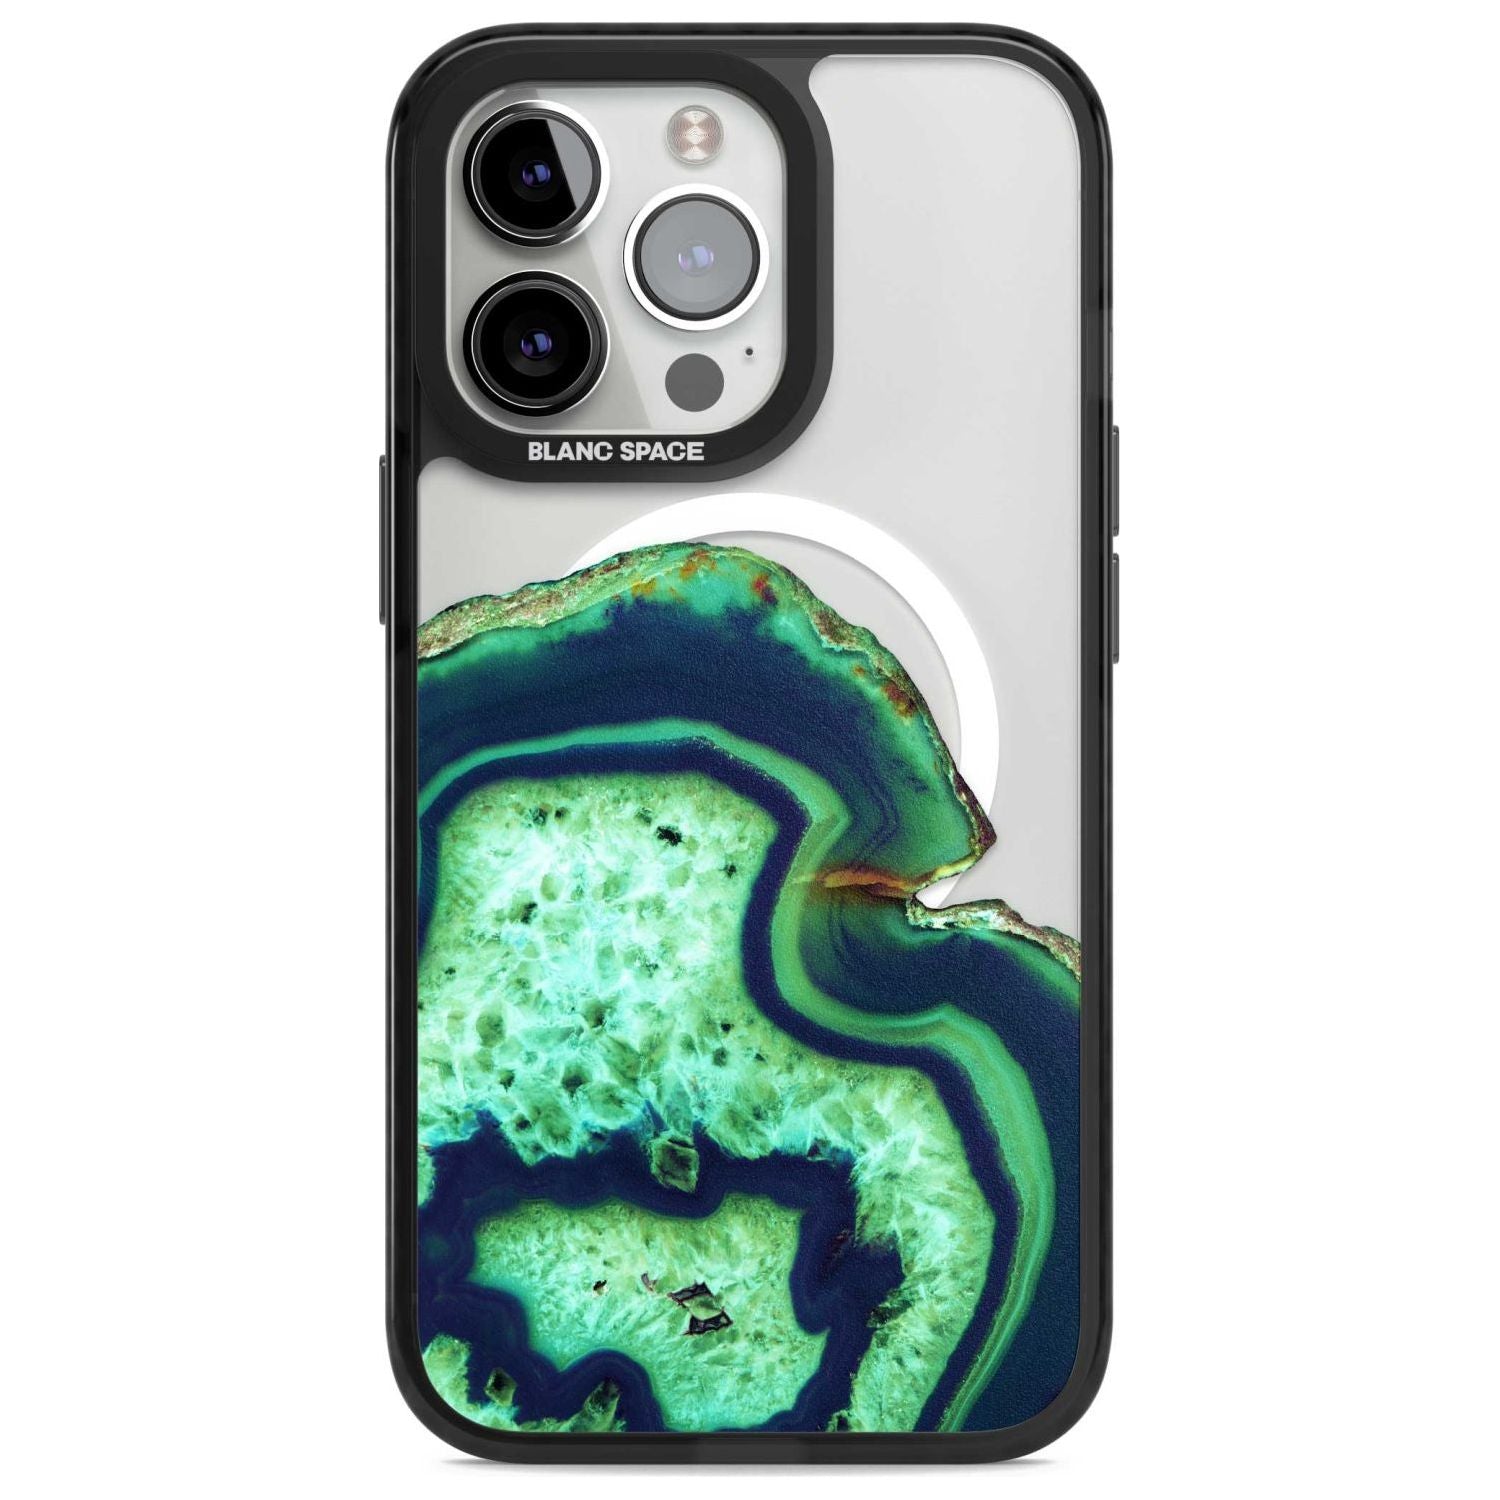 Neon Green & Blue Agate Crystal Transparent Design Phone Case iPhone 15 Pro Max / Magsafe Black Impact Case,iPhone 15 Pro / Magsafe Black Impact Case,iPhone 14 Pro Max / Magsafe Black Impact Case,iPhone 14 Pro / Magsafe Black Impact Case,iPhone 13 Pro / Magsafe Black Impact Case Blanc Space